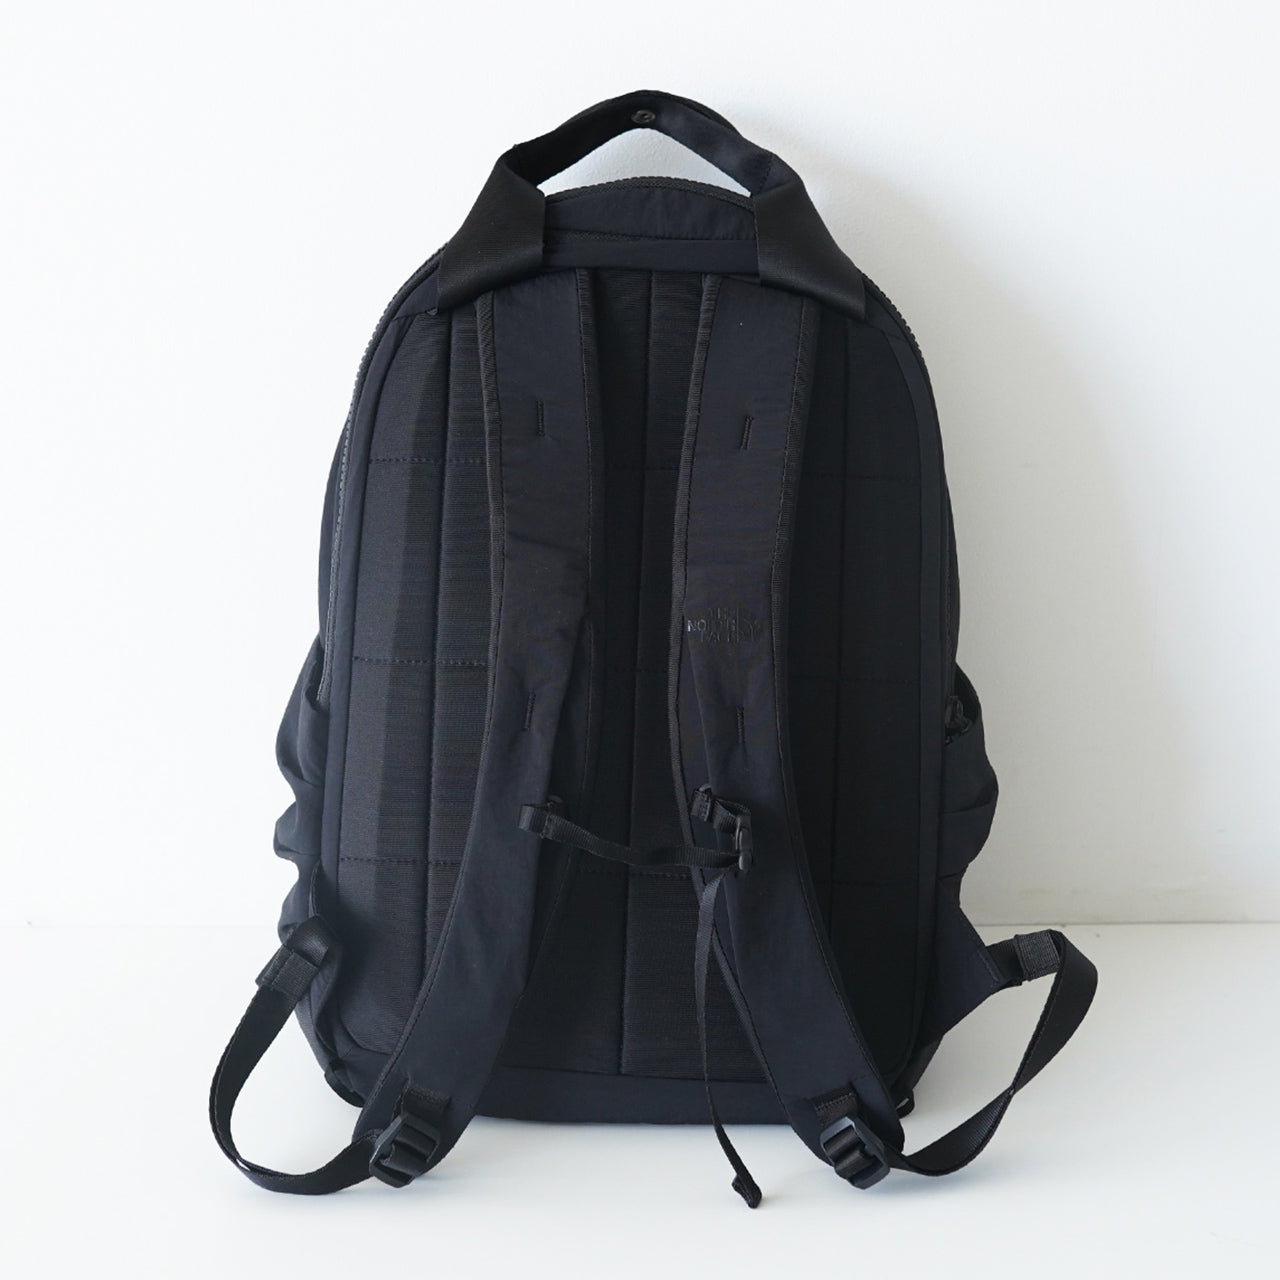 THE NORTH FACE ノースフェイス ネバーストップ デイパック W Never Stop Daypack 18L バックパック  リュックサック NMW82350【送料無料】